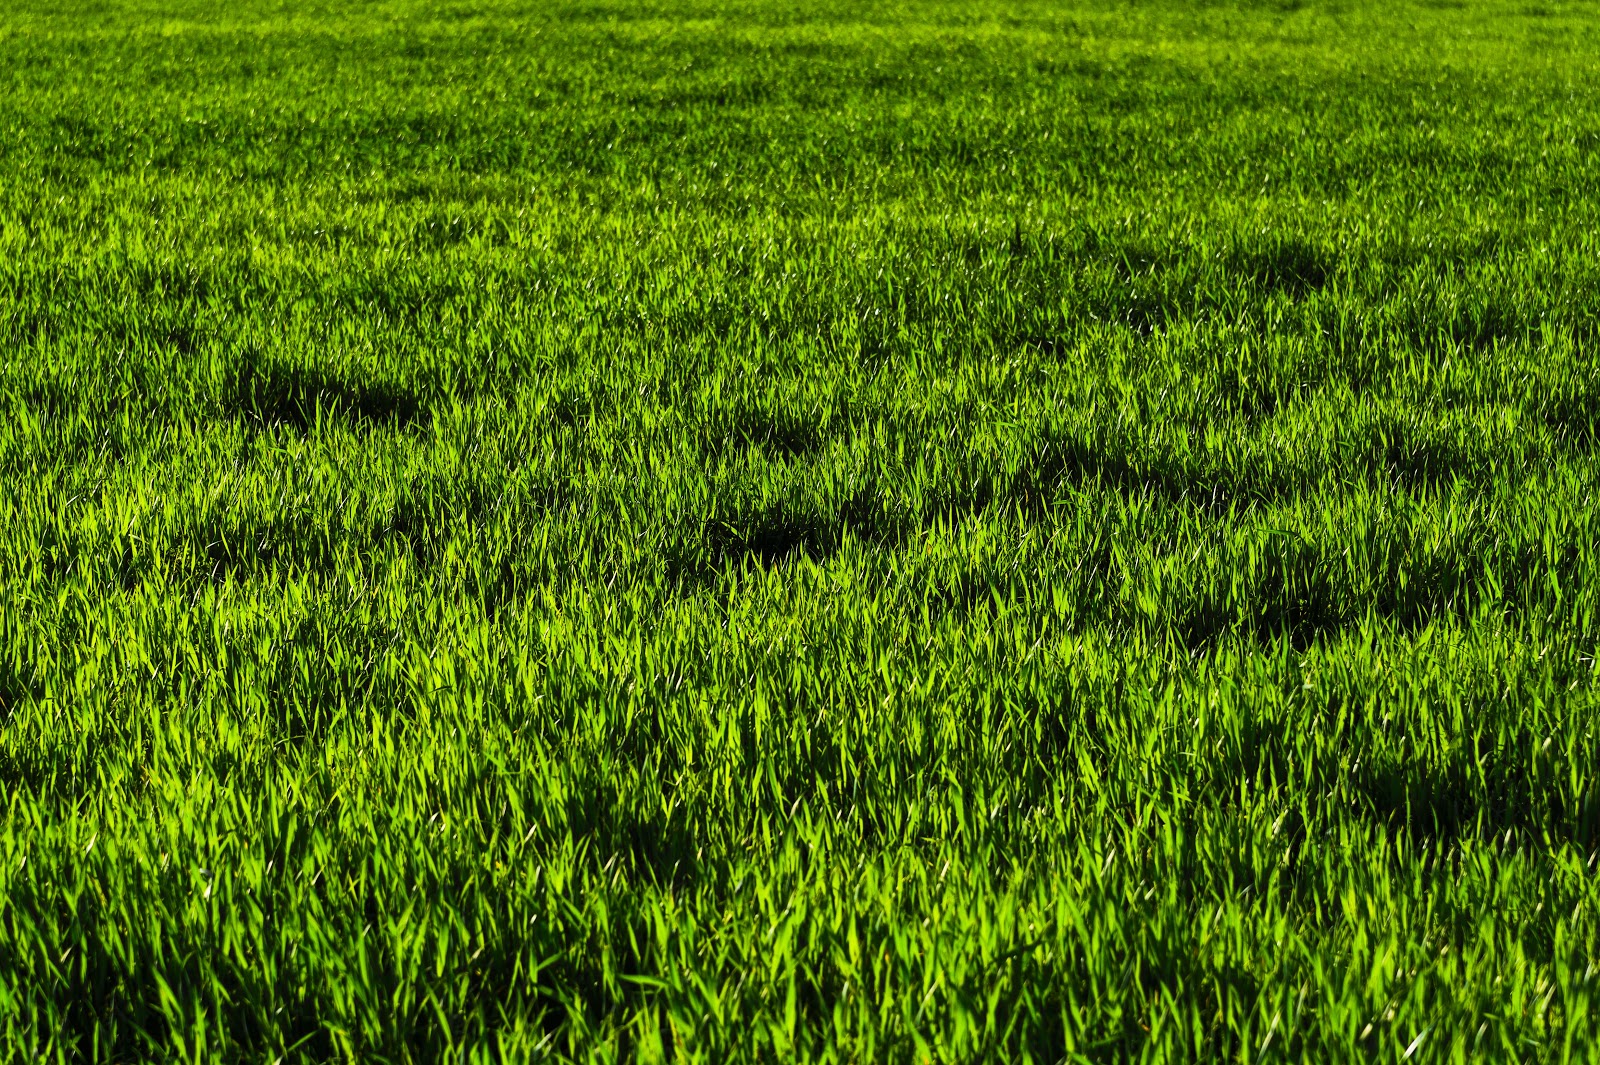 3 Important Questions About Aerating Your Lawn